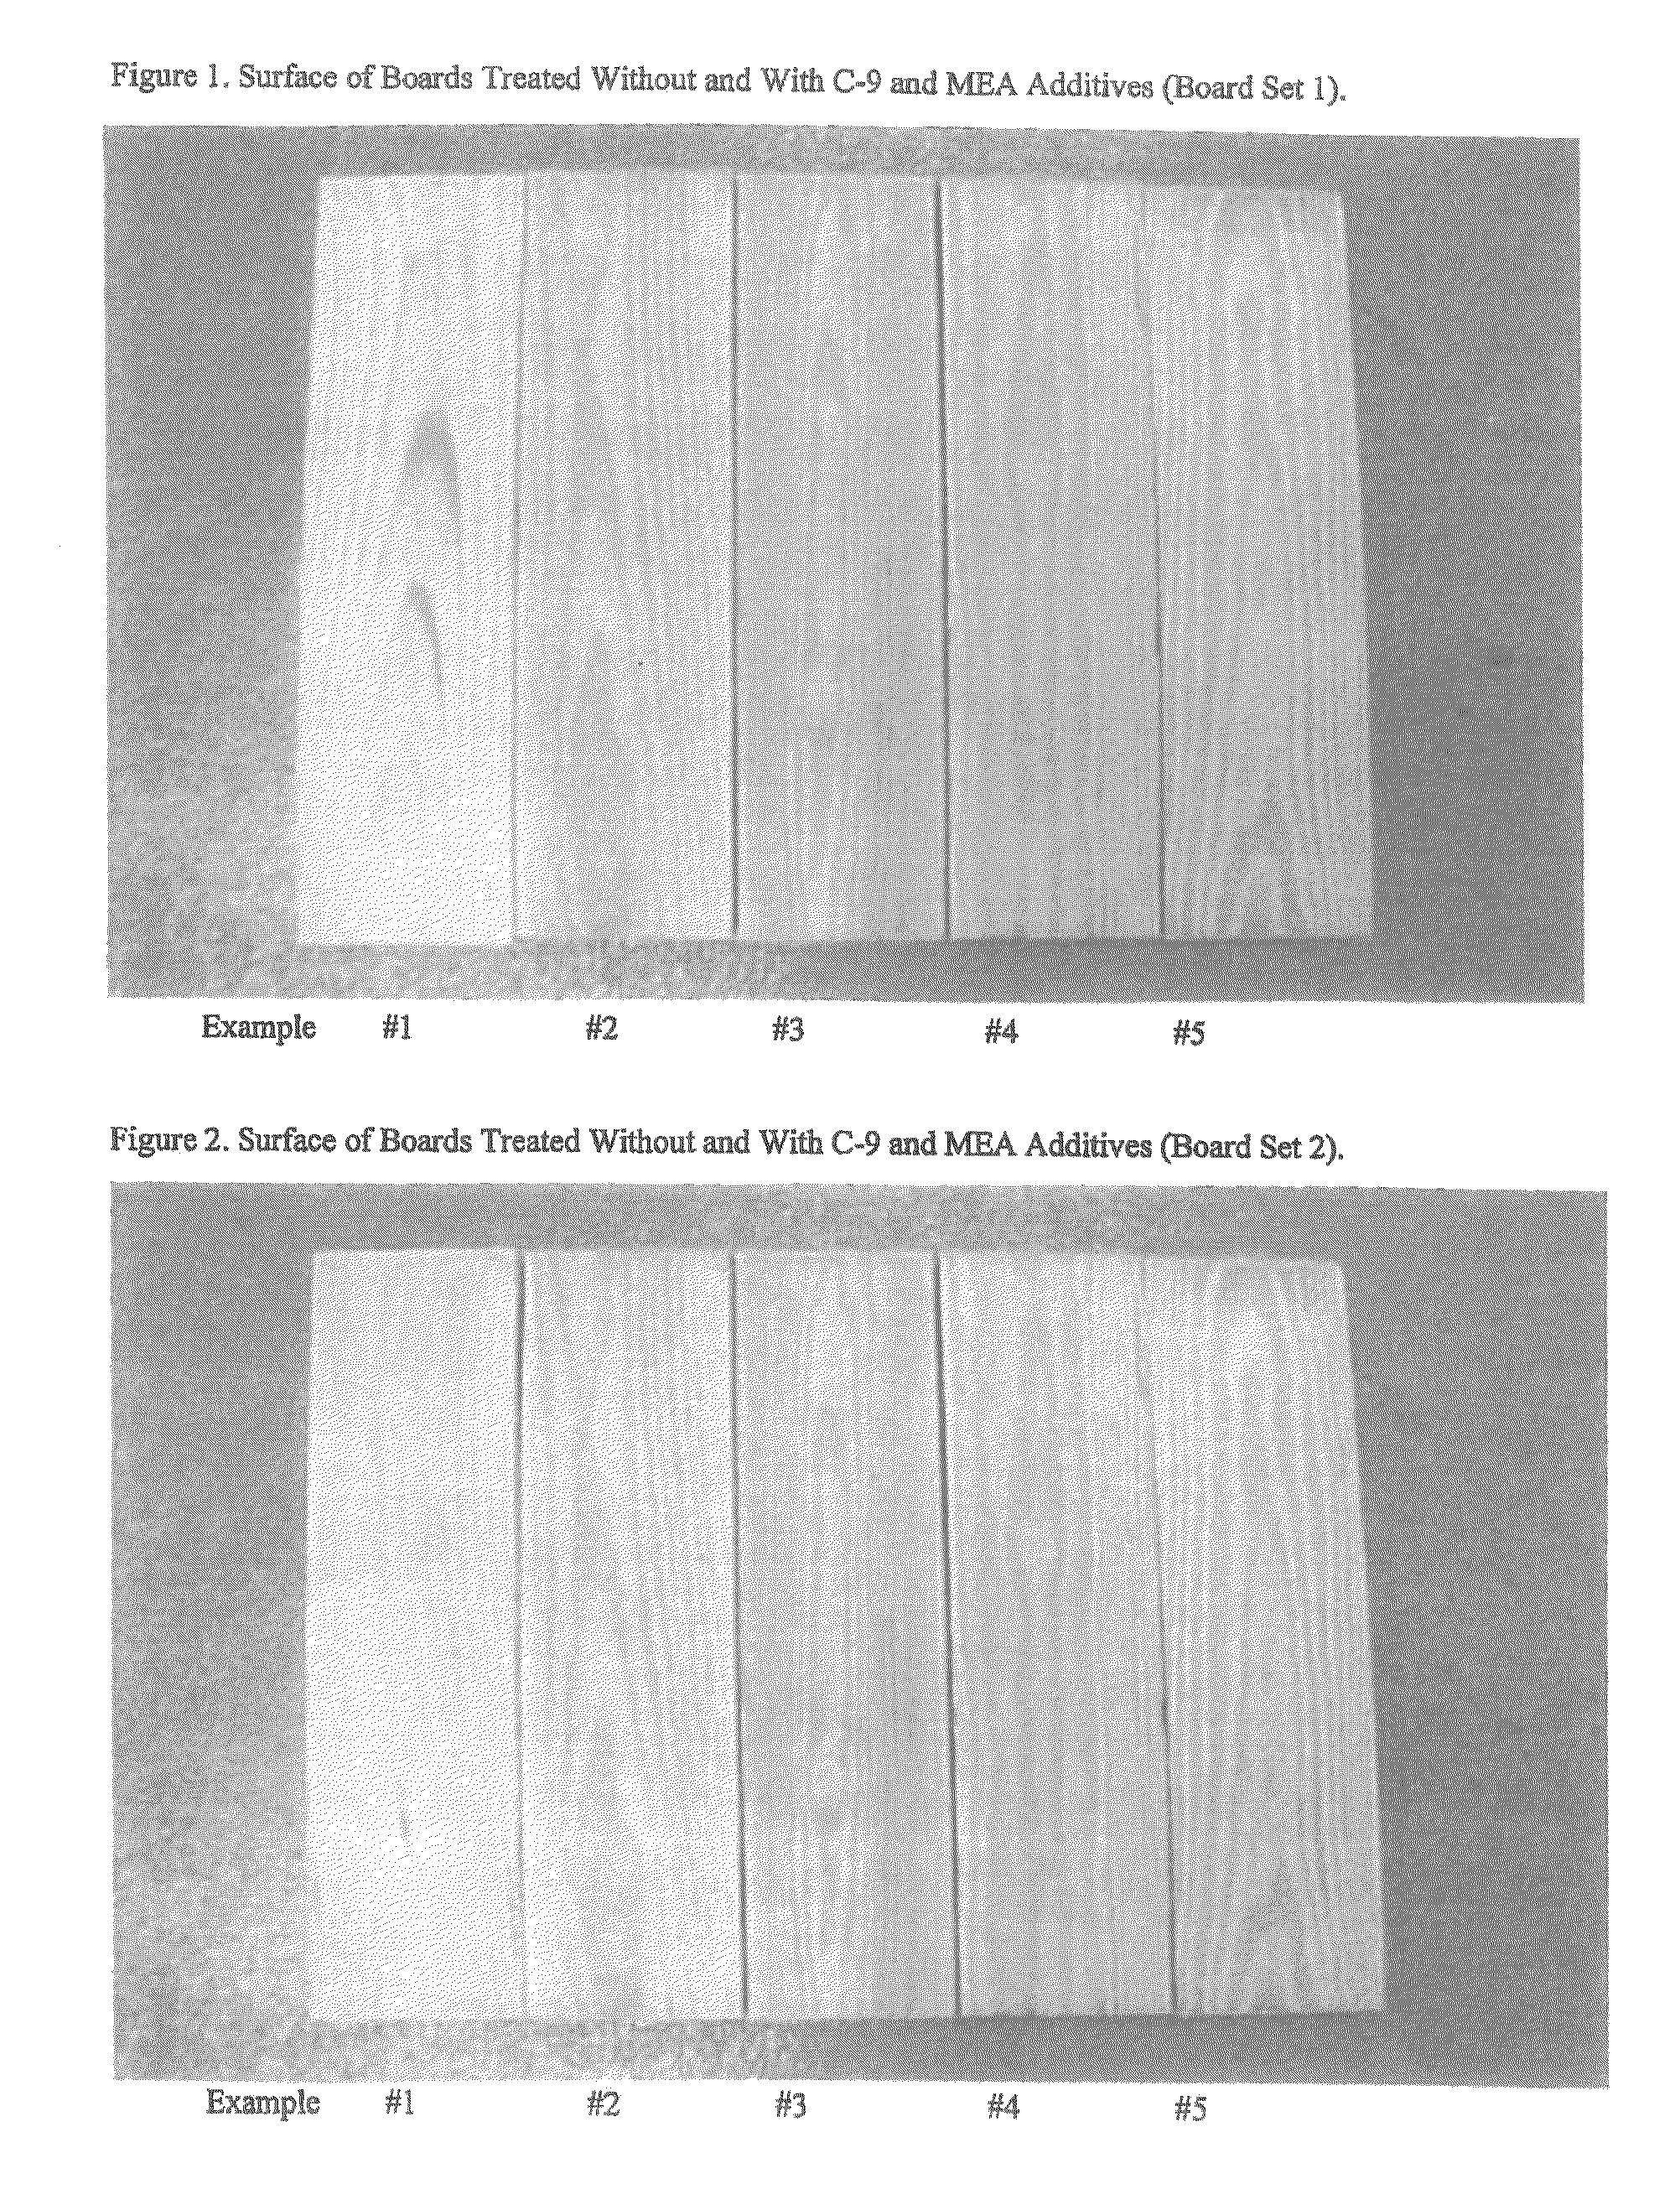 Method and composition for avoiding or mitigating the formation of preservative residues on the surface of wood treated with micronized copper-containing compositions